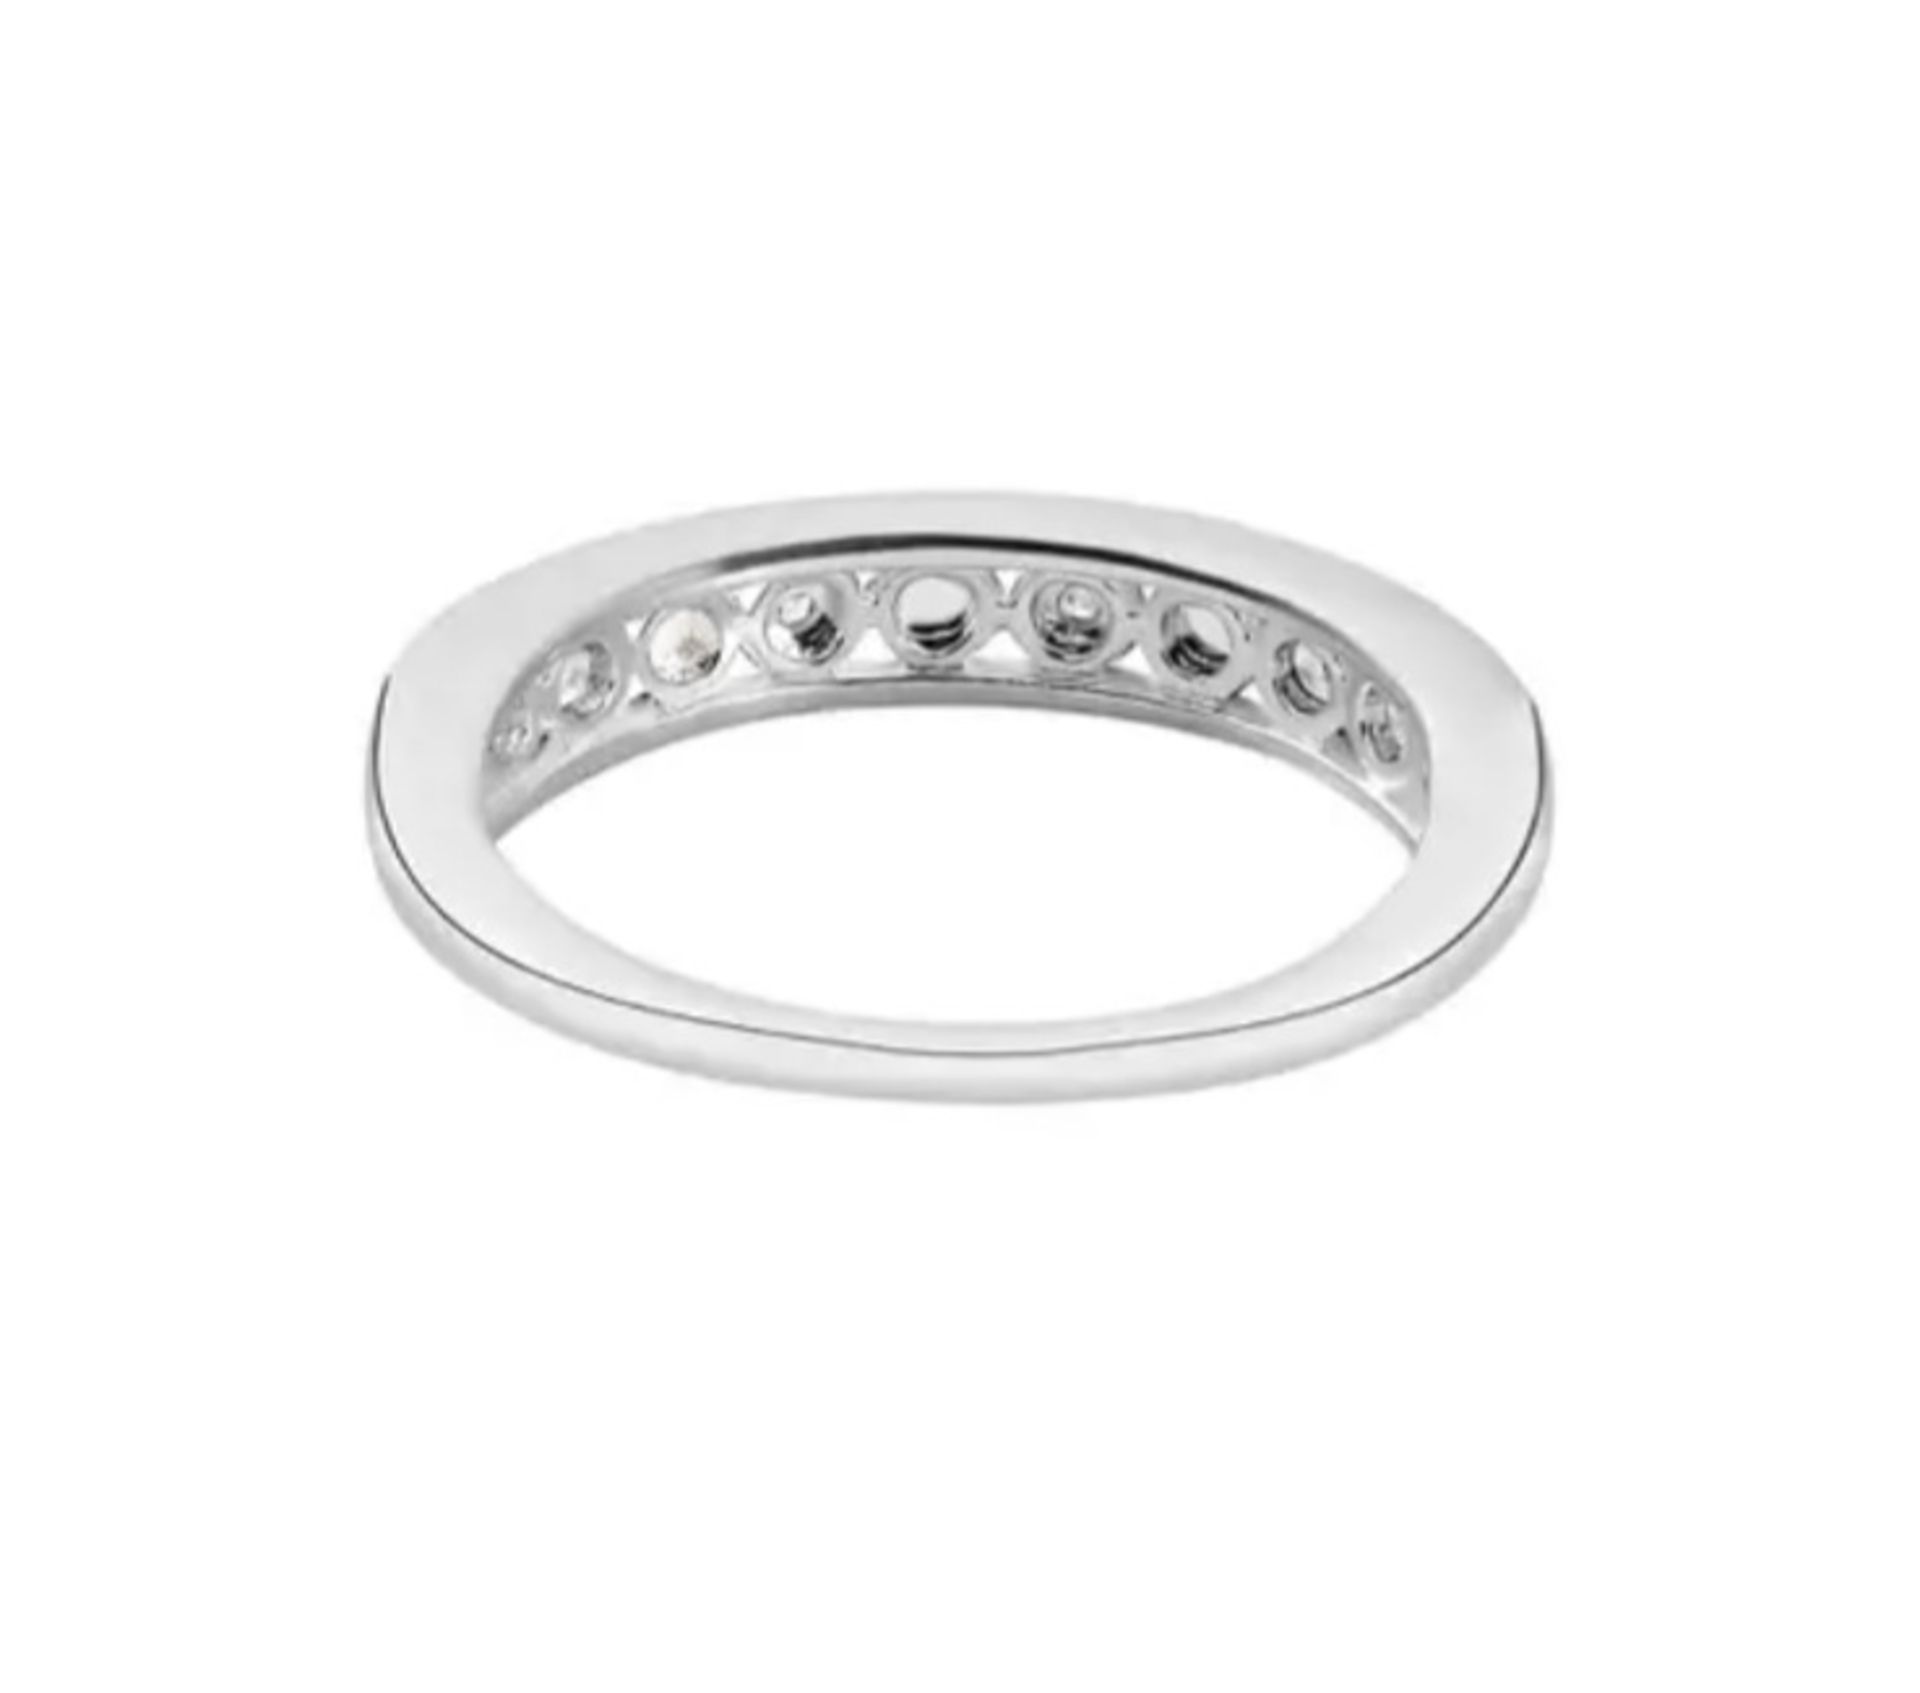 New! Diamond Half Eternity Ring in Sterling Silver - Image 4 of 4